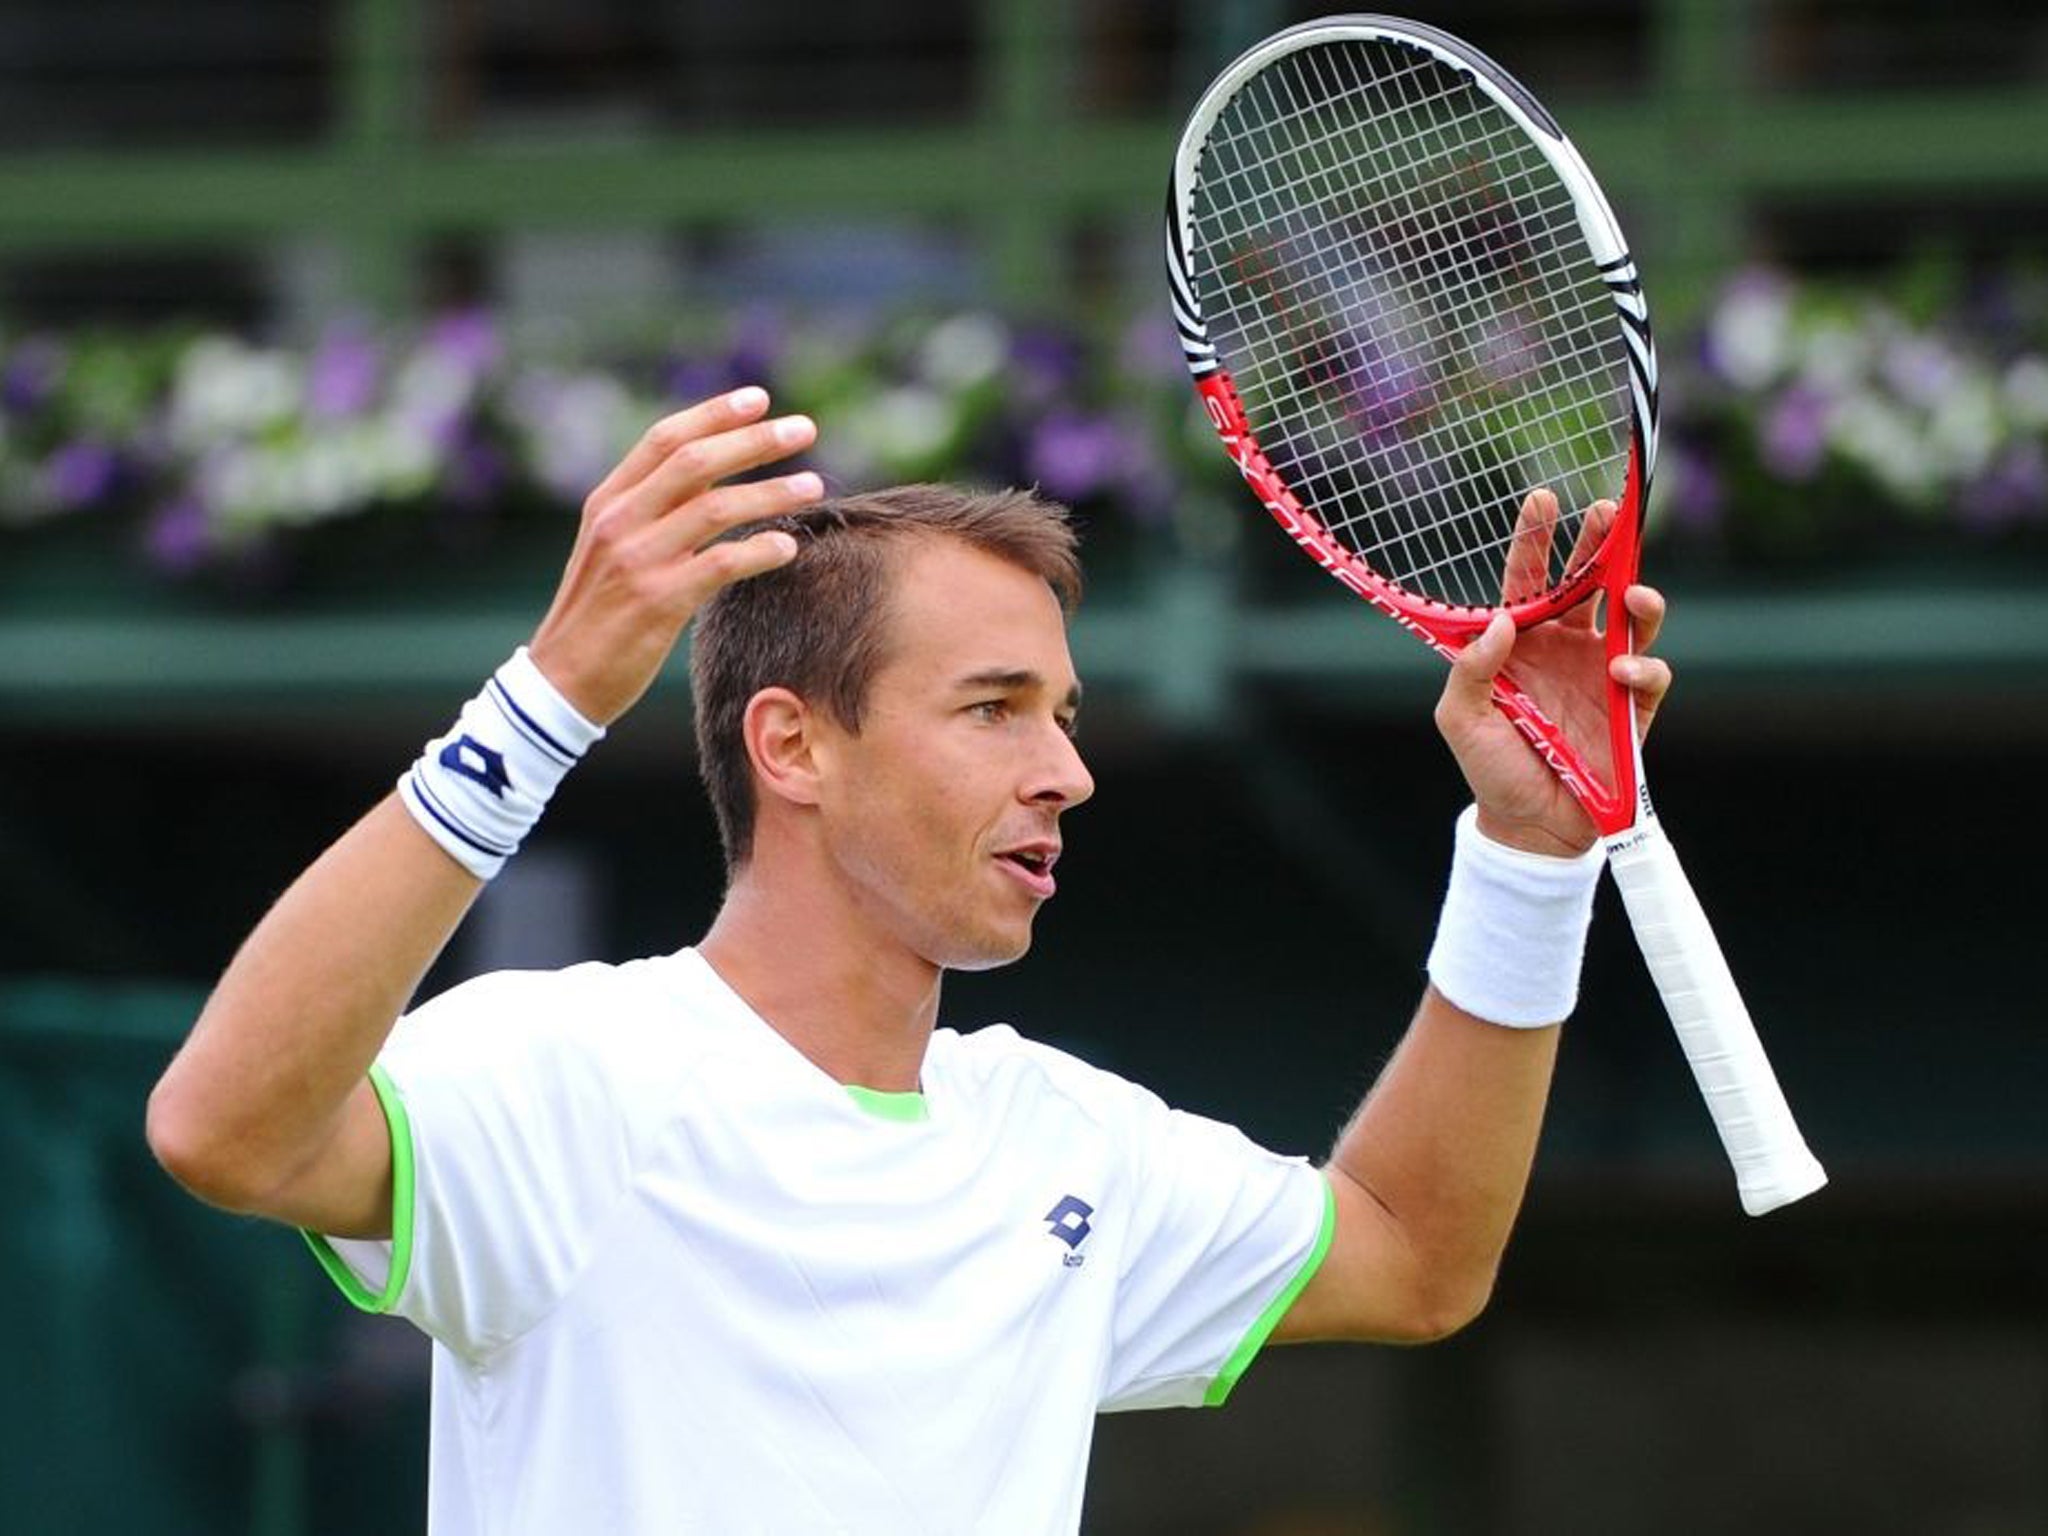 Last year's giant-killer Lukas Rosol as he made a first-round exit after defeat to Julian Reister